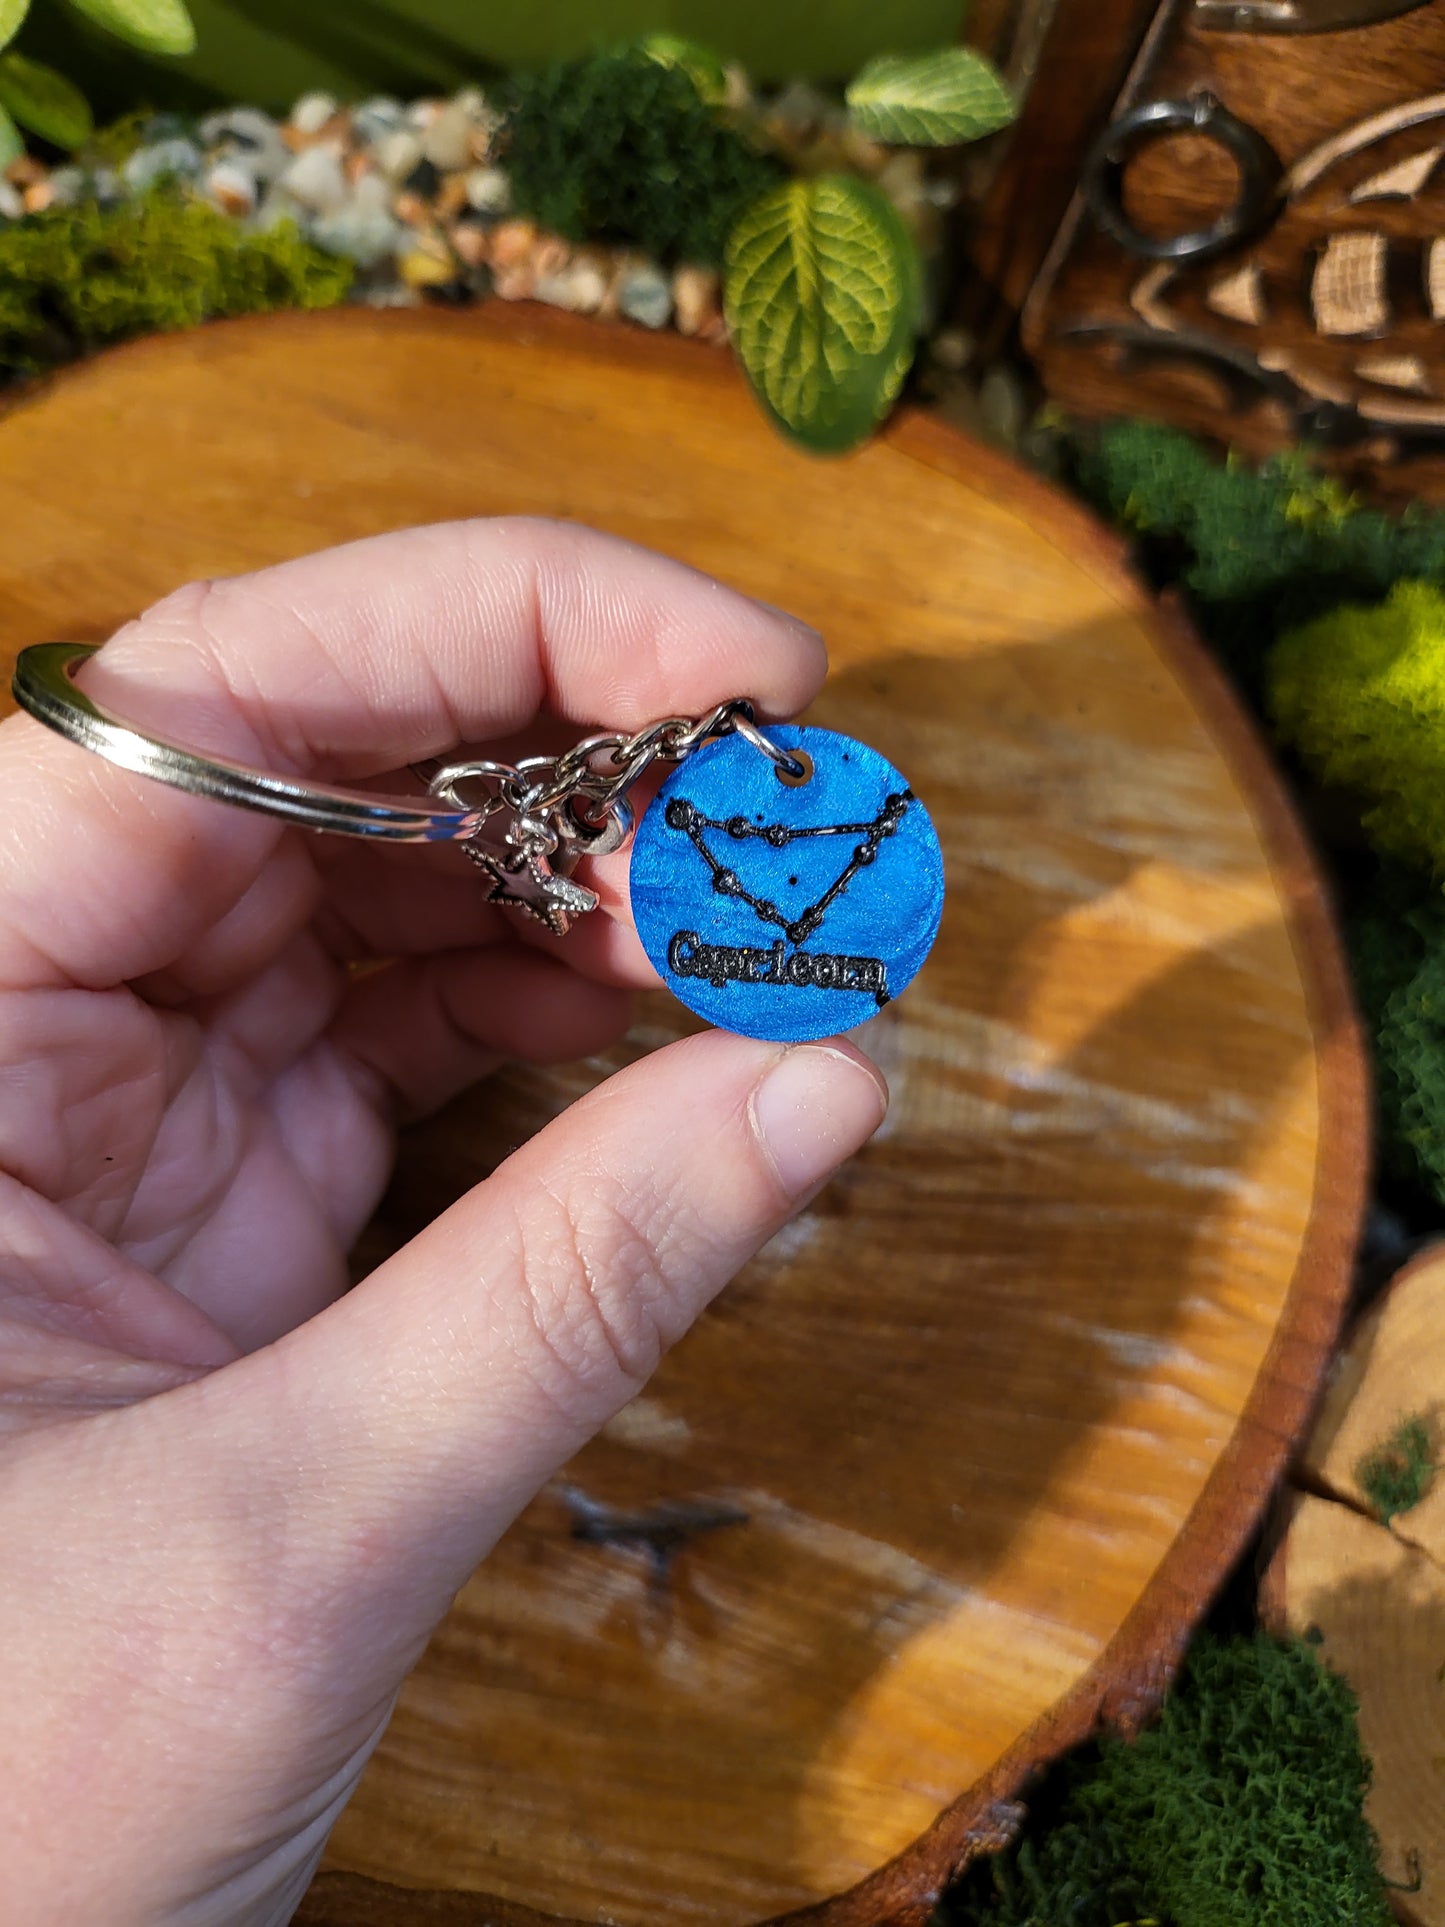 Blue and Black Astrological Keychains with Charms